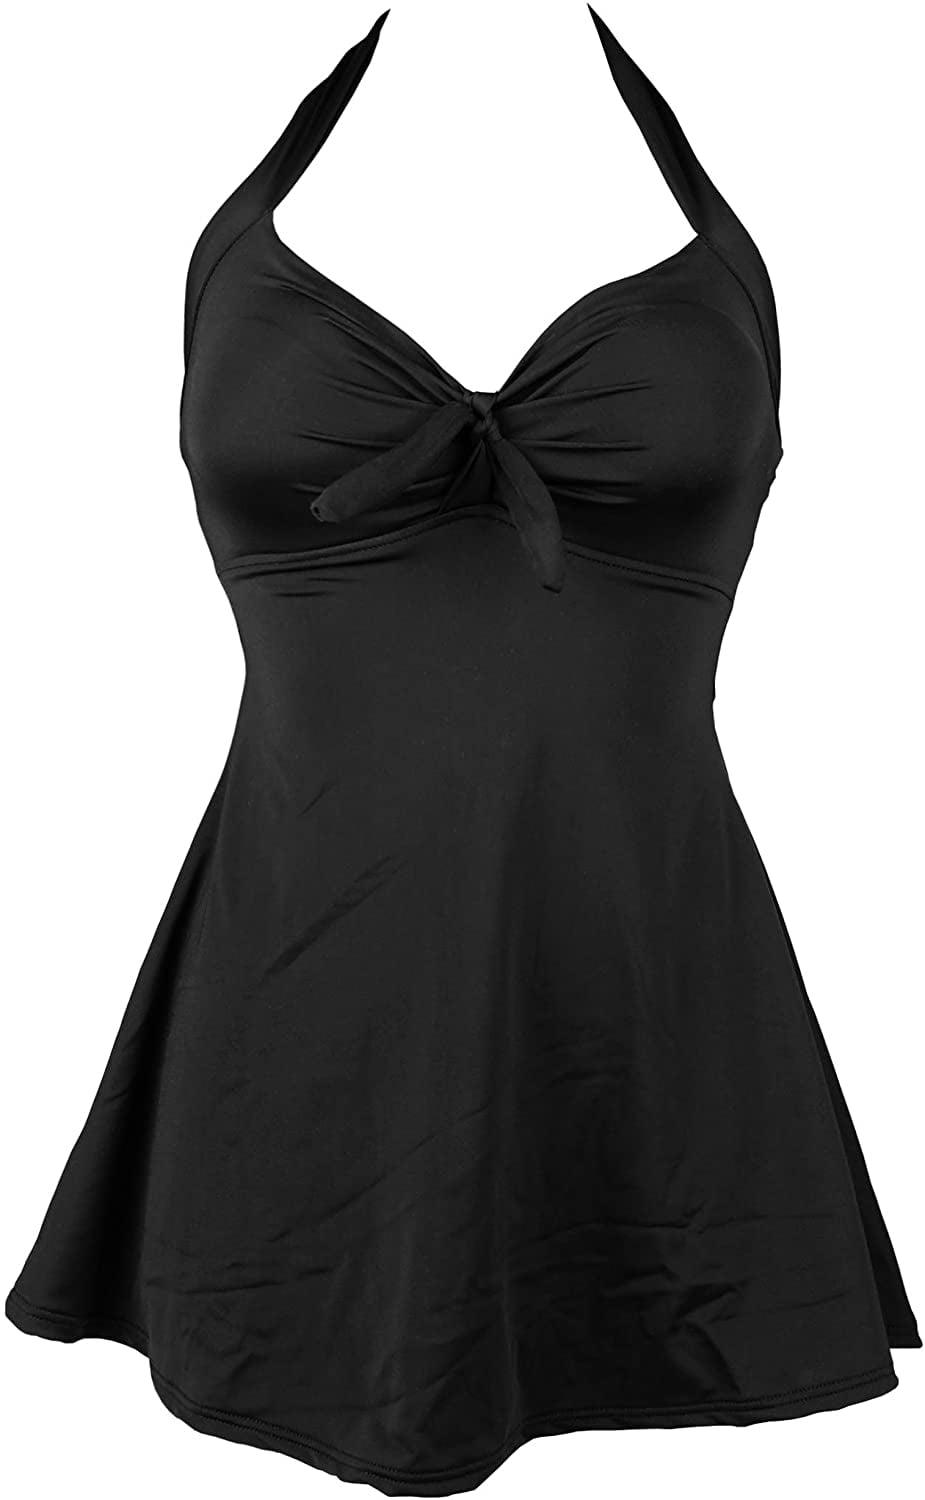 FBA COCOSHIP Vintage Sailor Pin Up Swimsuit Retro One Piece Skirtini Cover Up Swimdress 